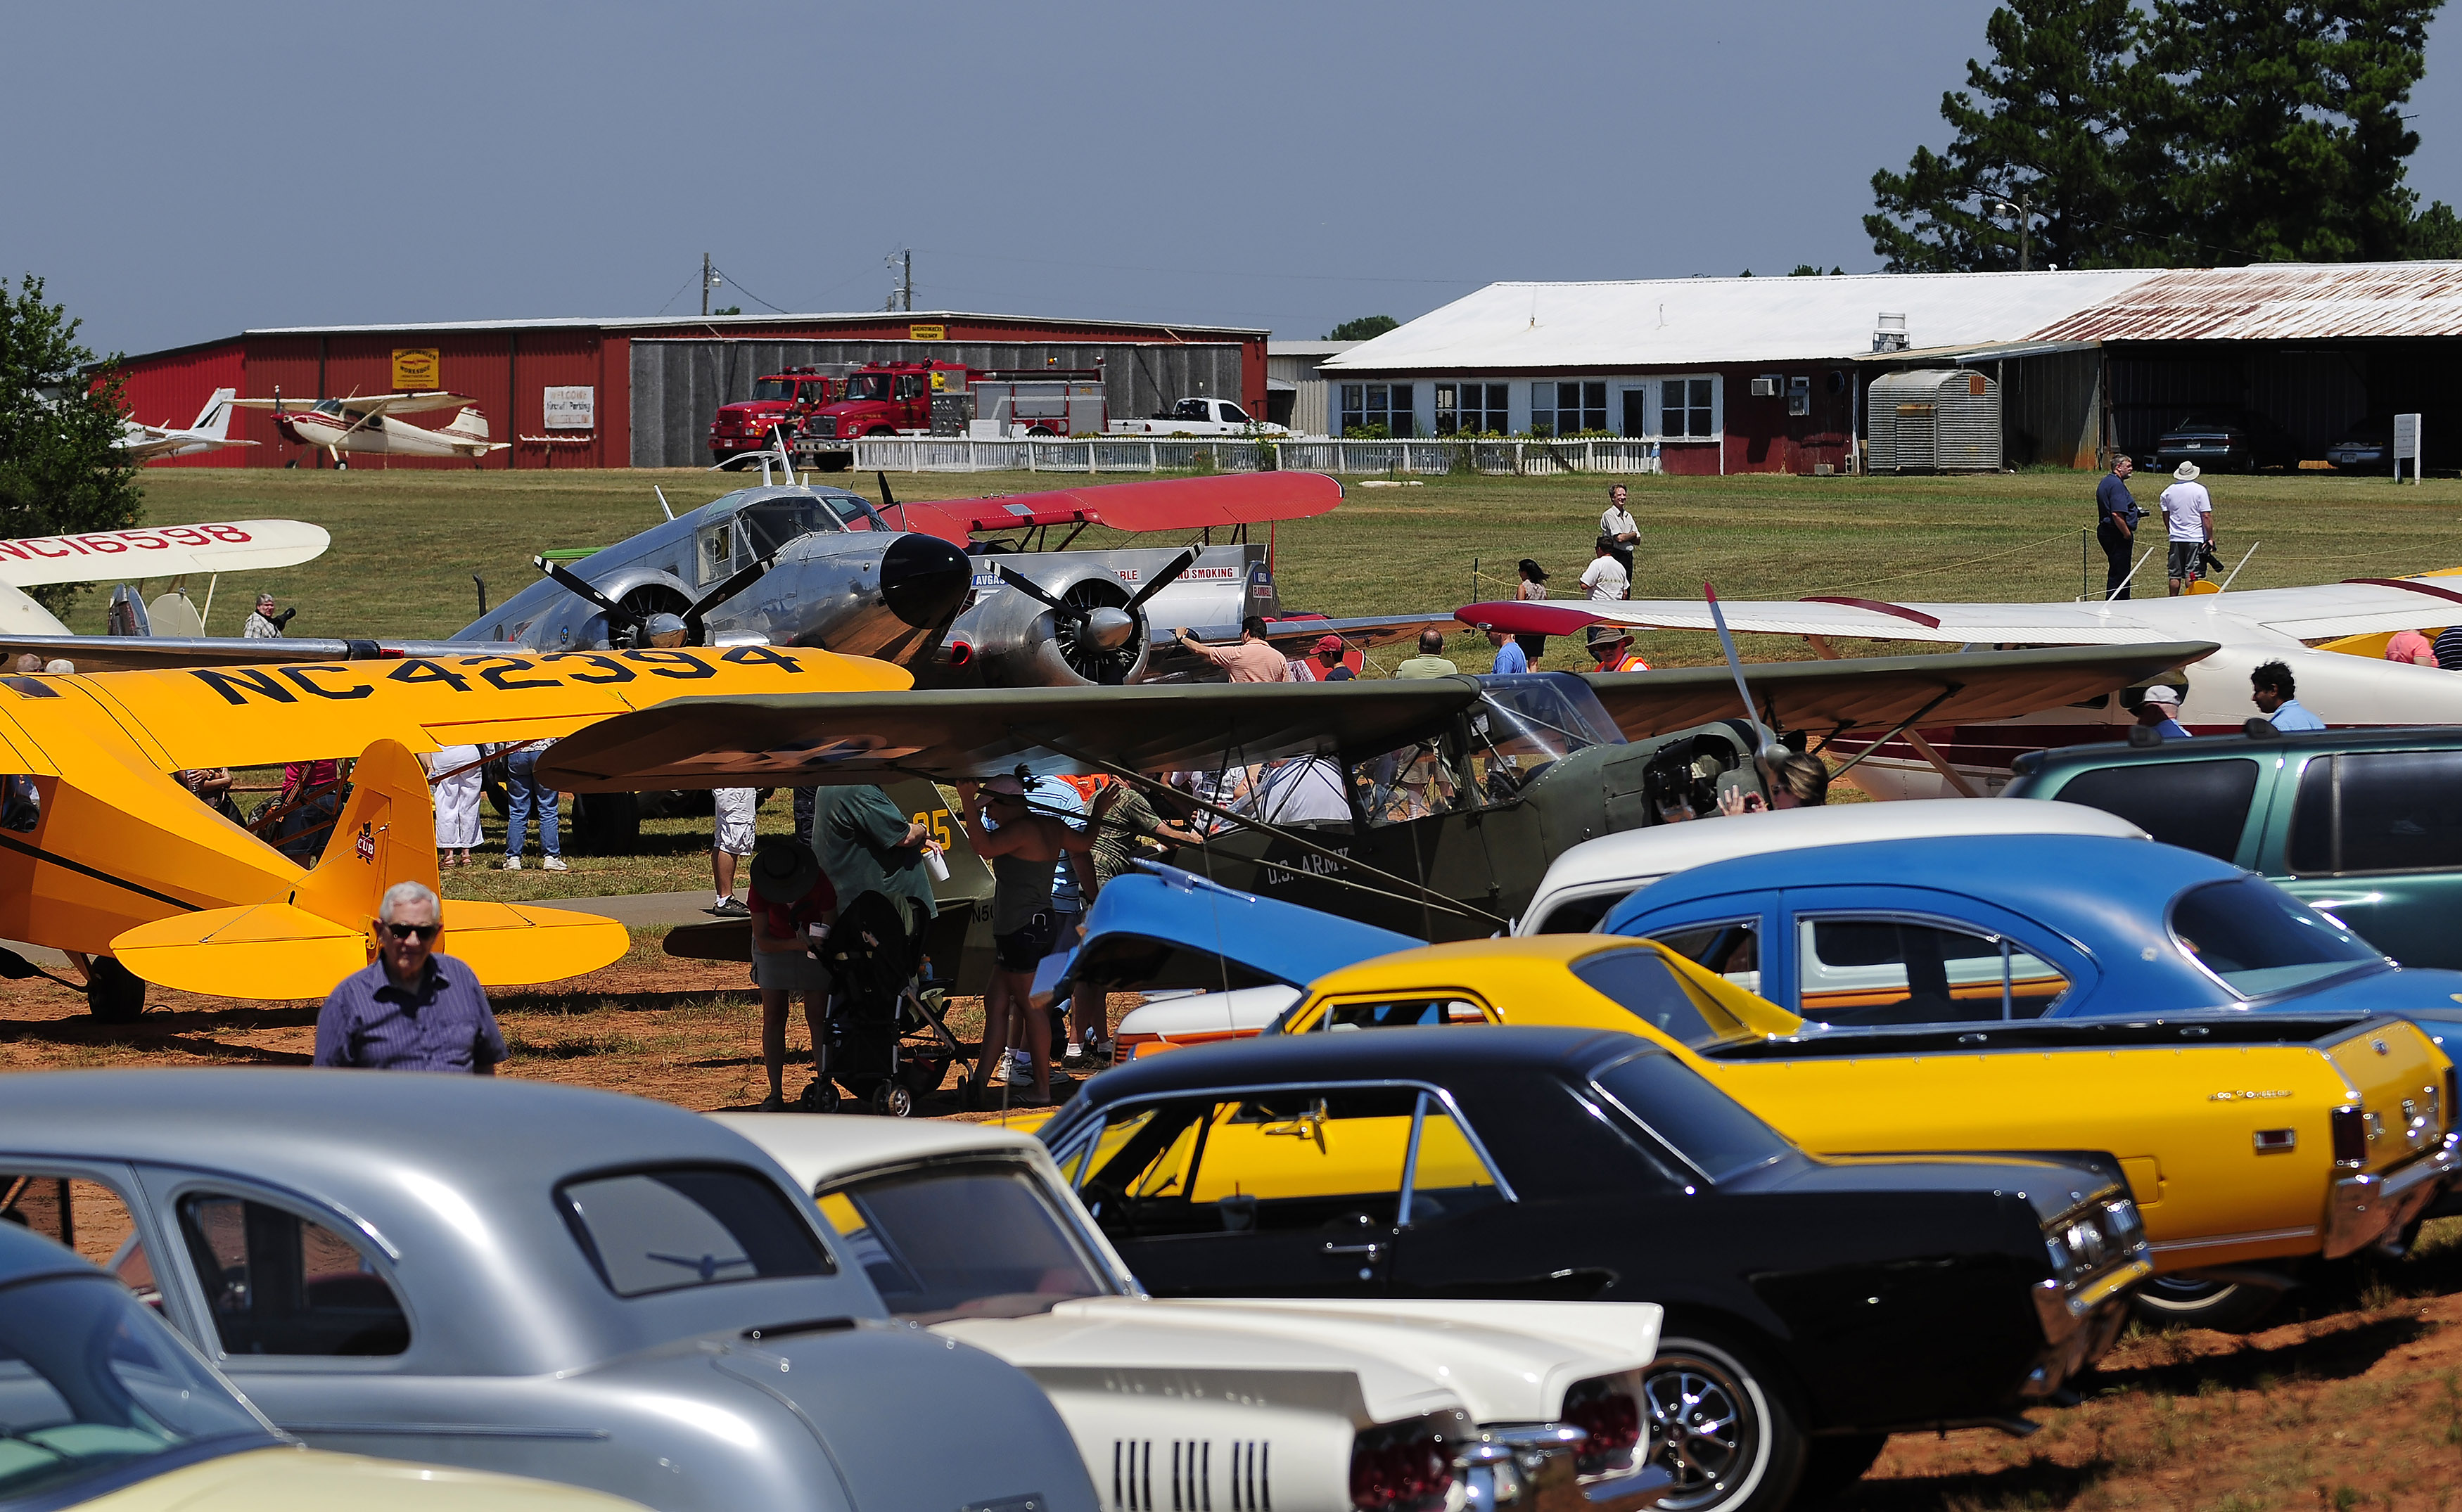 Classic and antique automobiles and airplanes line the ramp at during the 2011 Vintage Day celebration in Williamson, Georgia. Photo by David Tulis.